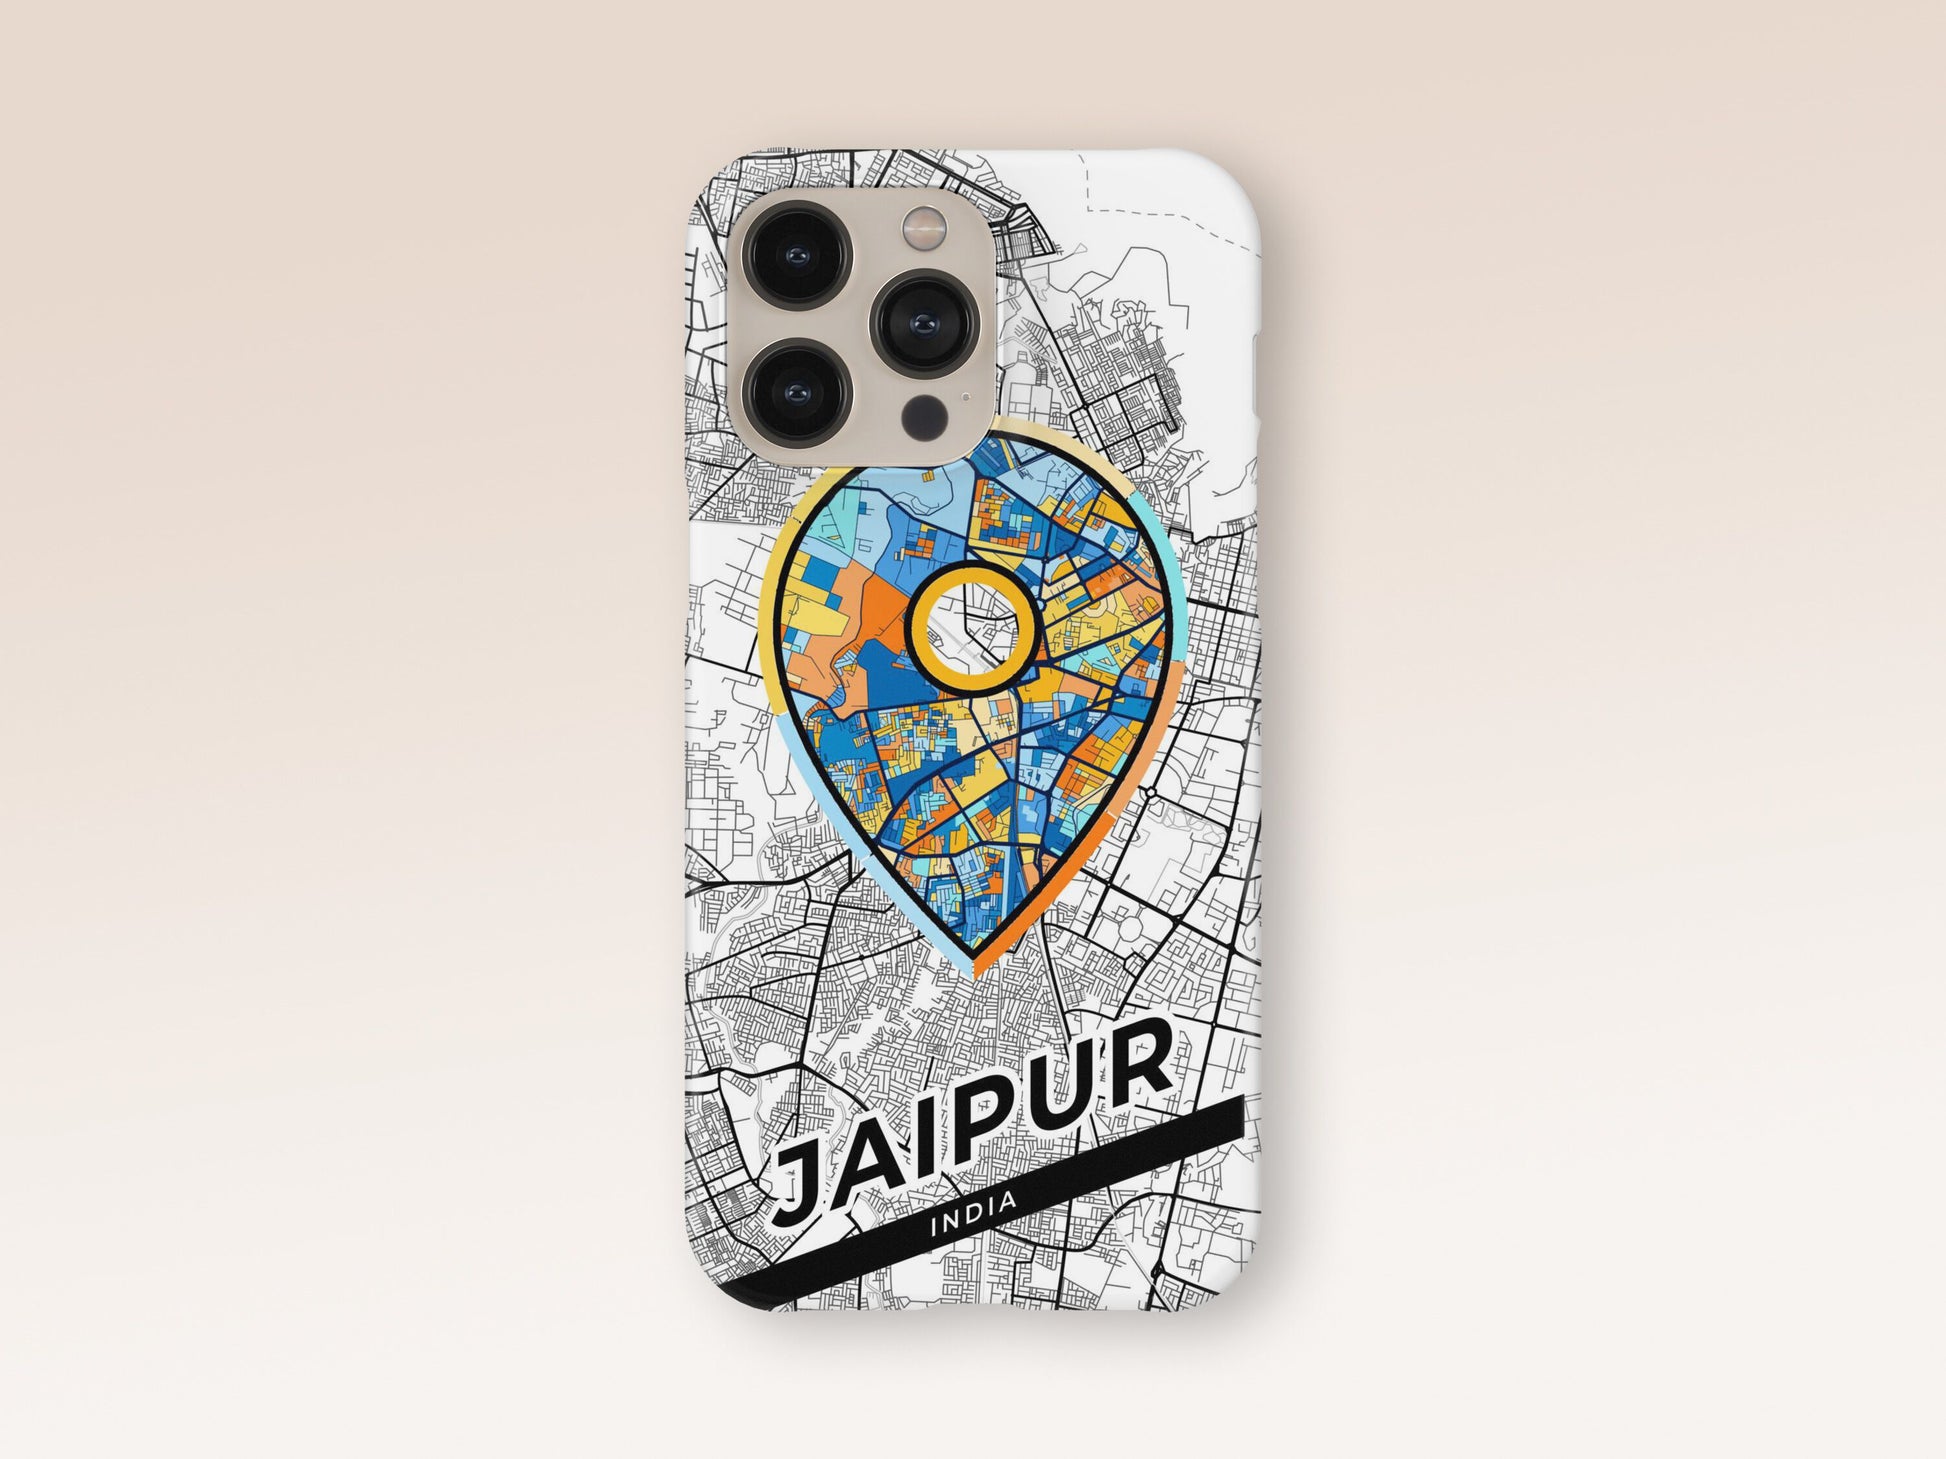 Jaipur India slim phone case with colorful icon. Birthday, wedding or housewarming gift. Couple match cases. 1